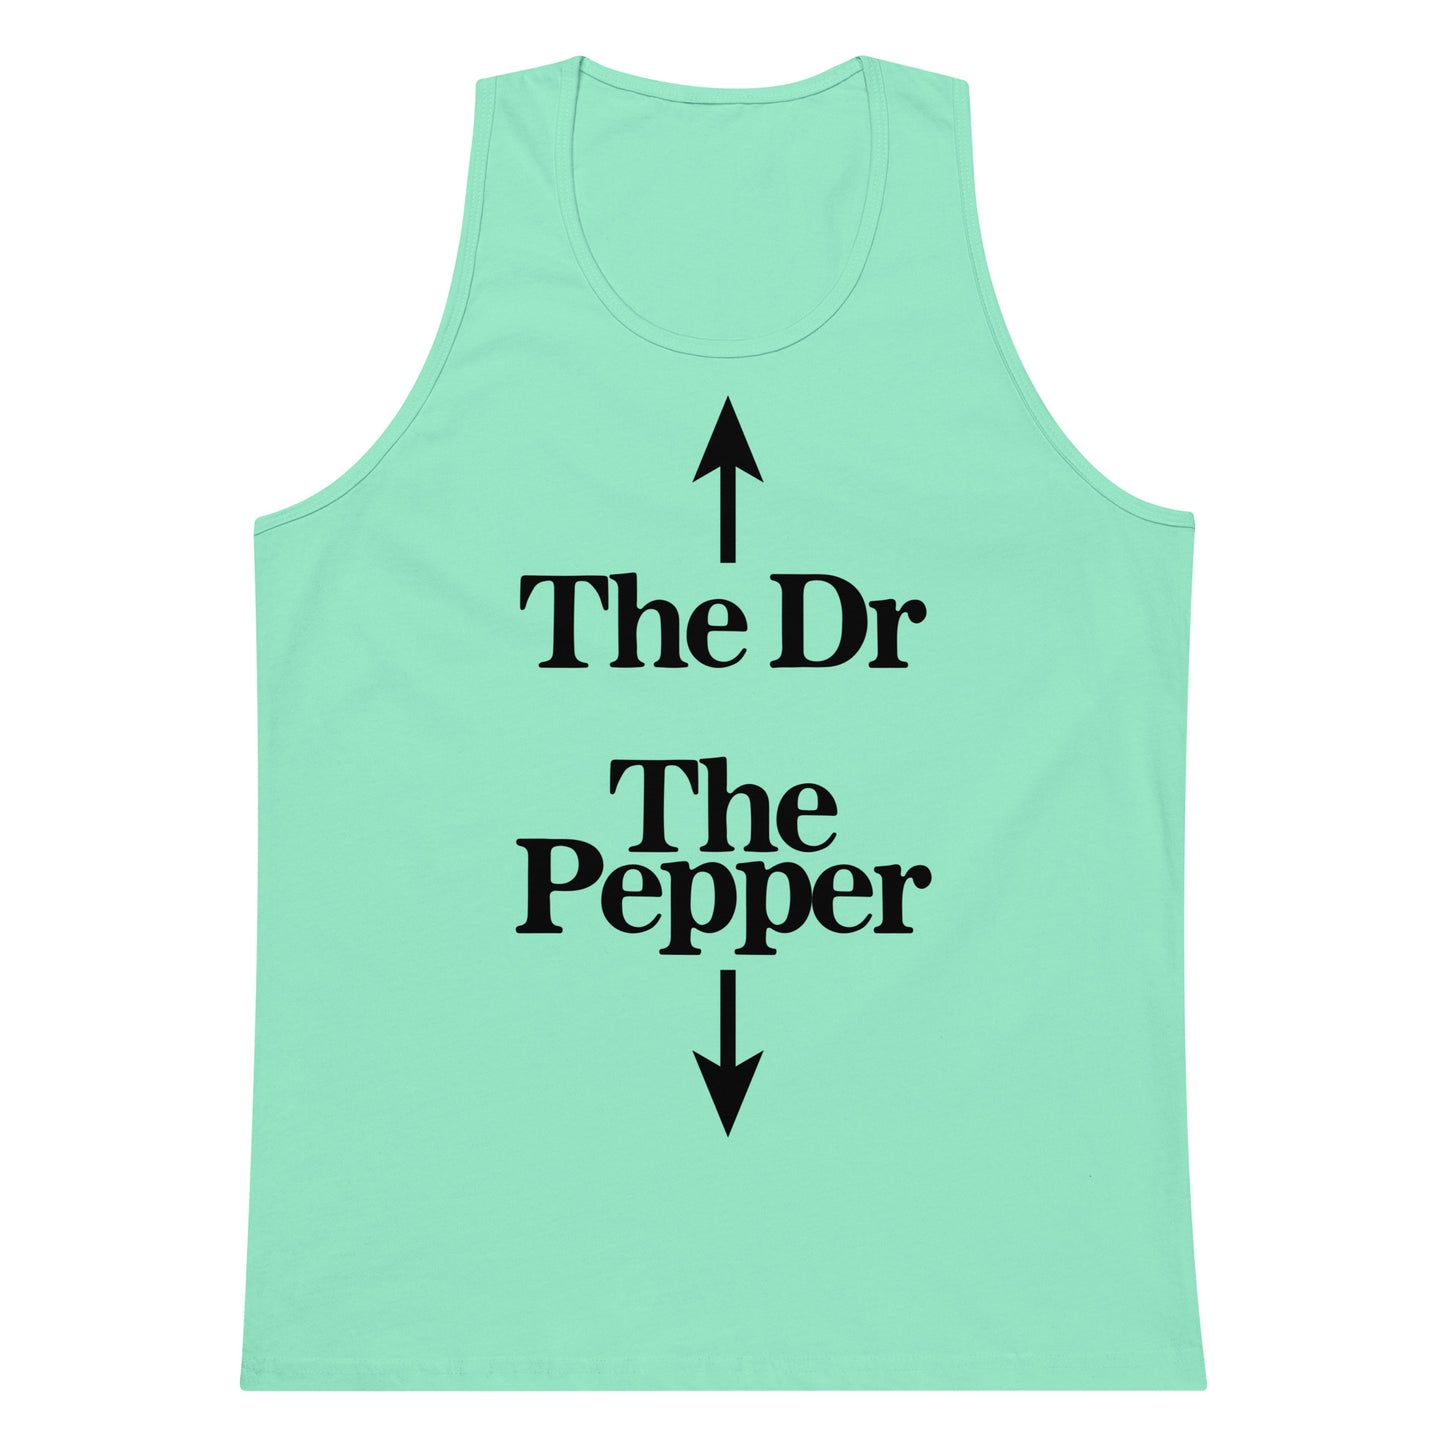 The Dr The Pepper tank top